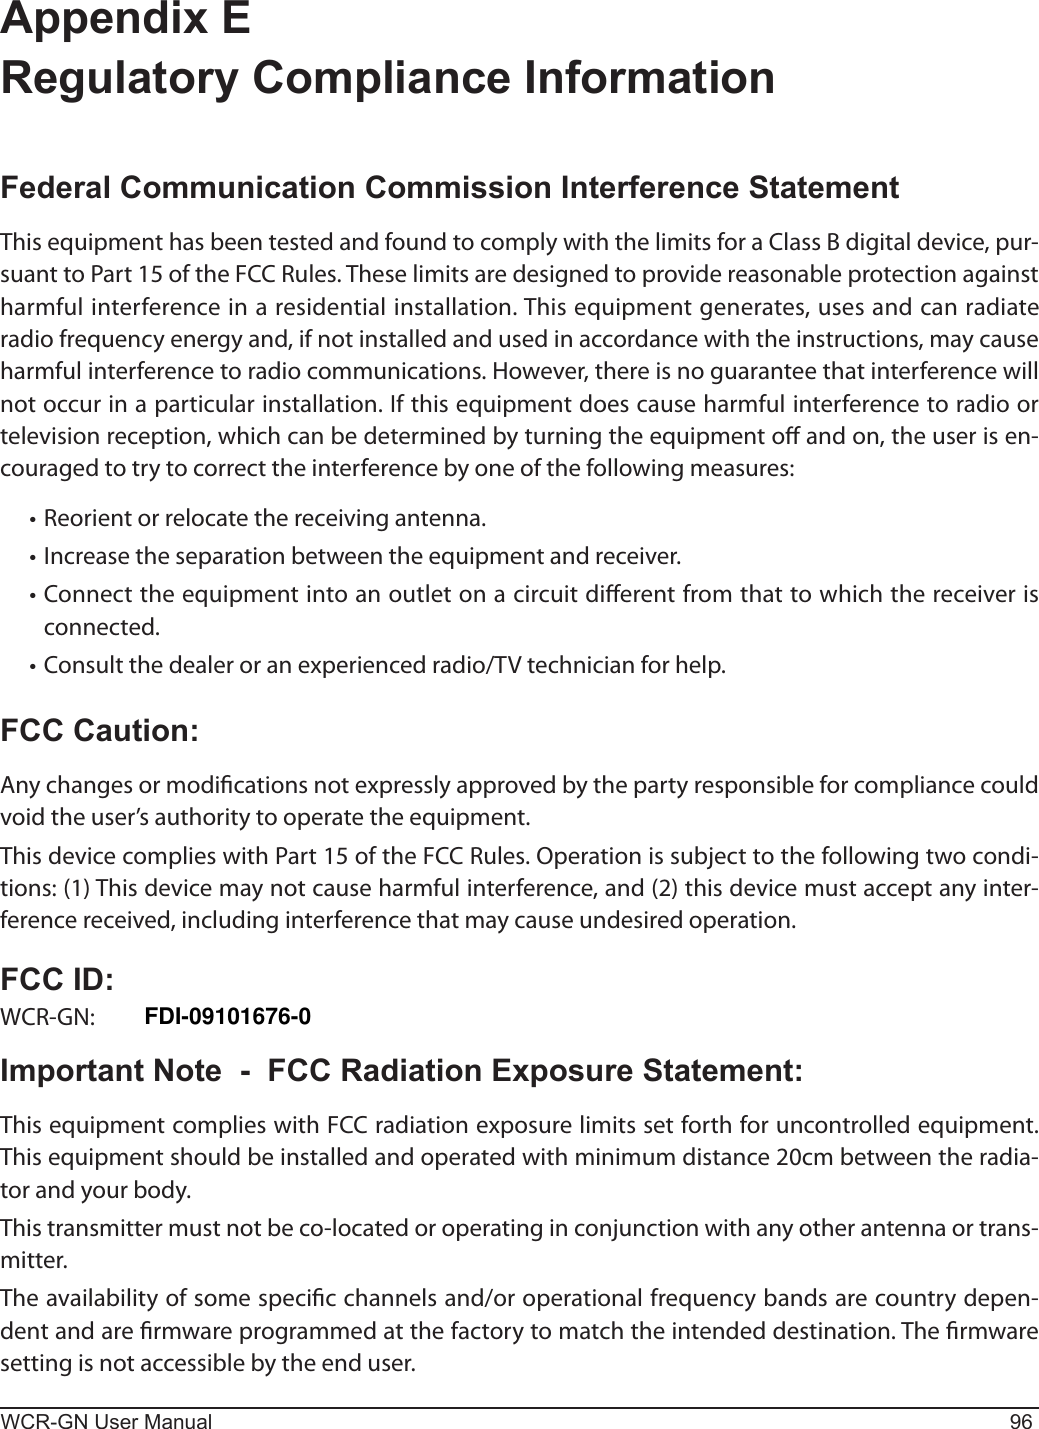 WCR-GN User Manual 96Appendix E  Regulatory Compliance InformationFederal Communication Commission Interference StatementThis equipment has been tested and found to comply with the limits for a Class B digital device, pur-suant to Part 15 of the FCC Rules. These limits are designed to provide reasonable protection against harmful interference in a residential installation. This equipment generates, uses and can radiate radio frequency energy and, if not installed and used in accordance with the instructions, may cause harmful interference to radio communications. However, there is no guarantee that interference will notoccurinaparticularinstallation.Ifthisequipmentdoescauseharmfulinterferencetoradioortelevision reception, which can be determined by turning the equipment o and on, the user is en-couraged to try to correct the interference by one of the following measures:•Reorientorrelocatethereceivingantenna.•Increasetheseparationbetweentheequipmentandreceiver.•Connecttheequipmentintoanoutletonacircuitdierentfromthattowhichthereceiverisconnected.•Consultthedealeroranexperiencedradio/TVtechnicianforhelp.FCC Caution:Any changes or modications not expressly approved by the party responsible for compliance could void the user’s authority to operate the equipment.ThisdevicecomplieswithPart15oftheFCCRules.Operationissubjecttothefollowingtwocondi-tions: (1) This device may not cause harmful interference, and (2) this device must accept any inter-ference received, including interference that may cause undesired operation.FCC ID:WCR-GN: FDI-09102082-0Important Note  -  FCC Radiation Exposure Statement:This equipment complies with FCC radiation exposure limits set forth for uncontrolled equipment. This equipment should be installed and operated with minimum distance 20cm between the radia-tor and your body.Thistransmittermustnotbeco-locatedoroperatinginconjunctionwithanyotherantennaortrans-mitter.Theavailabilityofsomespecicchannelsand/oroperationalfrequencybandsarecountrydepen-dent and are rmware programmed at the factory to match the intended destination. The rmware setting is not accessible by the end user.FDI-09101676-0 